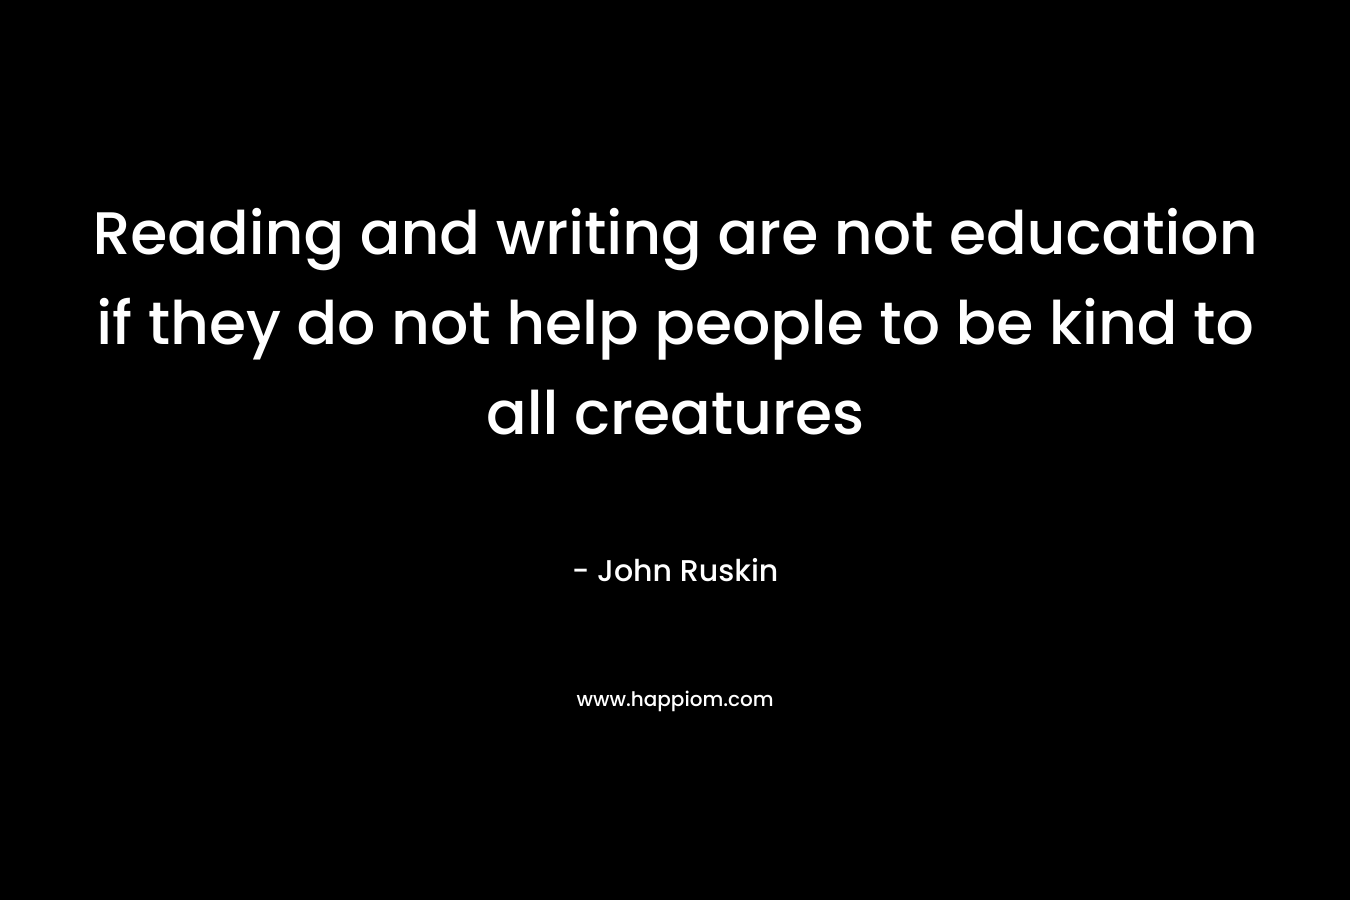 Reading and writing are not education if they do not help people to be kind to all creatures – John Ruskin